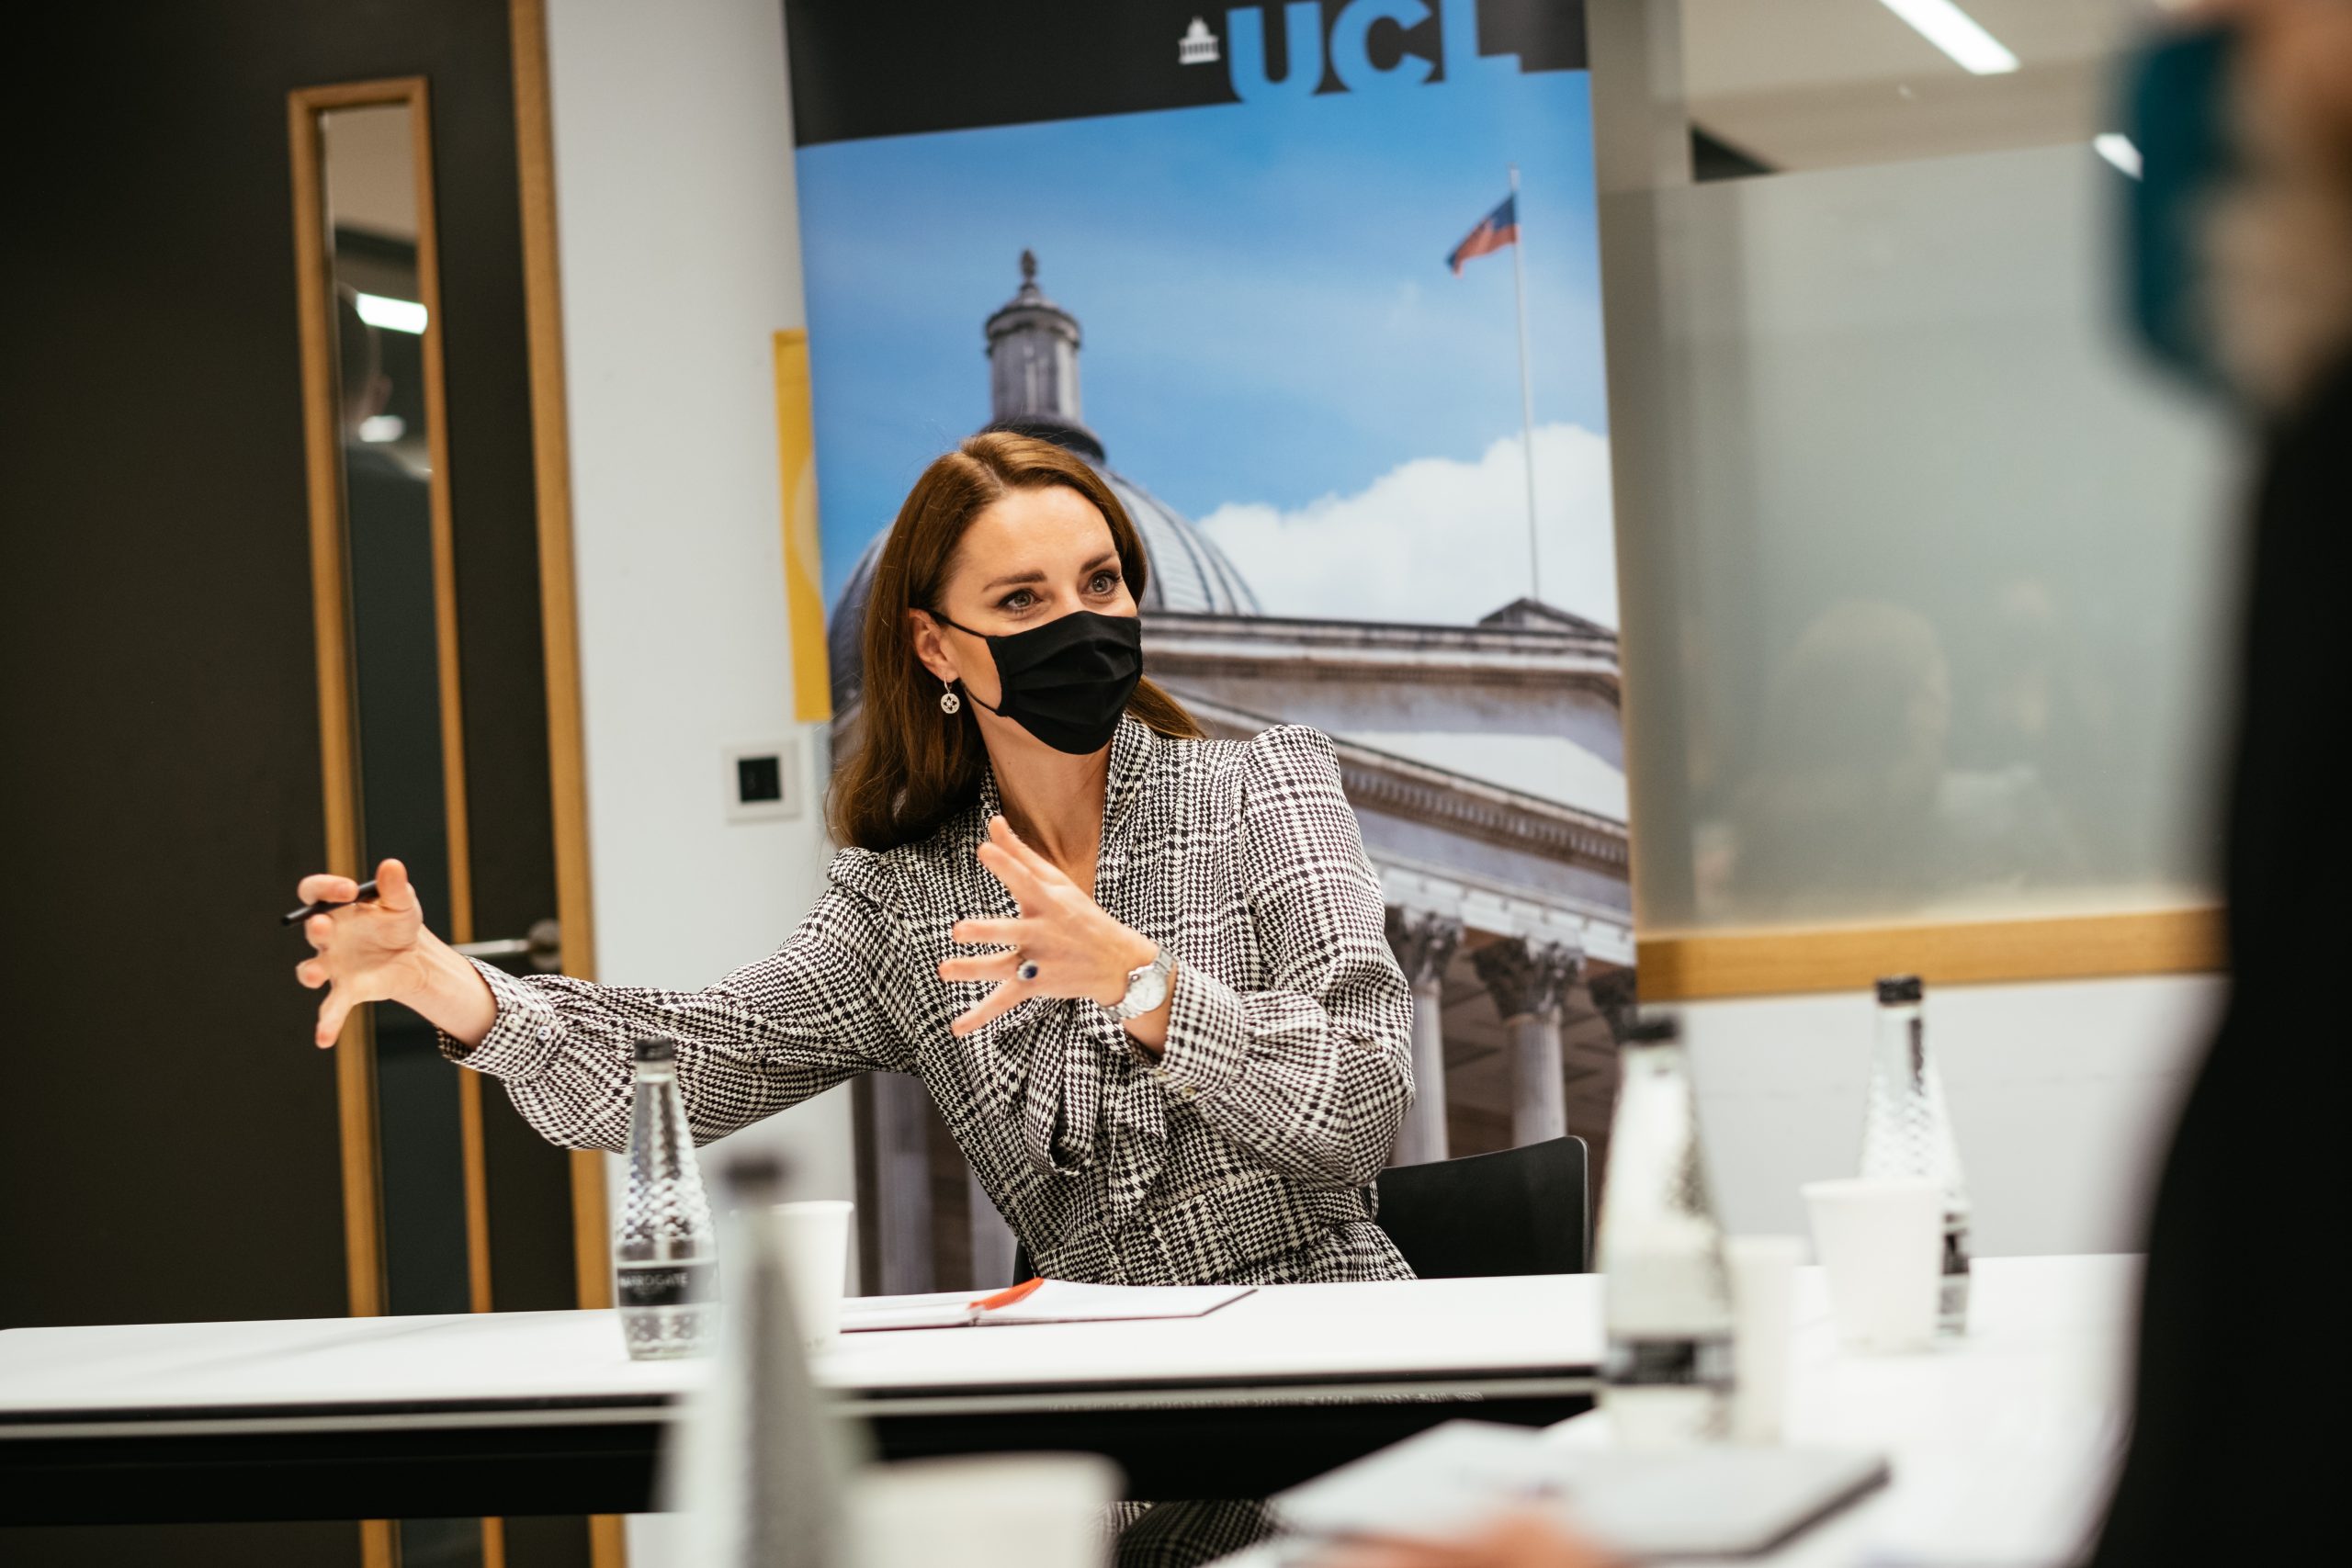 The Duchess of Cambridge explaining something in front of a UCL banner